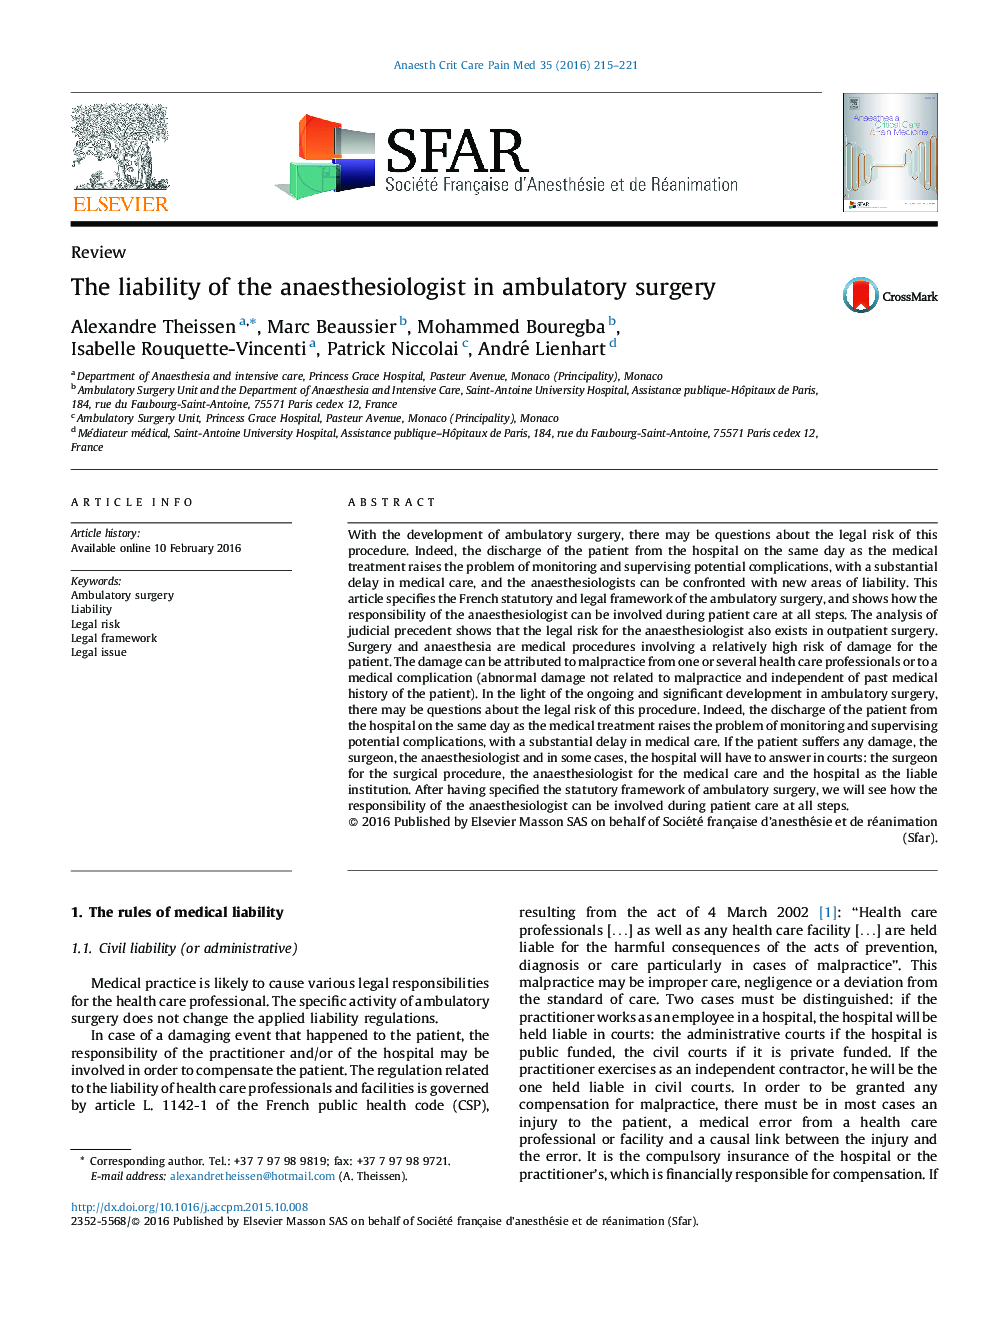 The liability of the anaesthesiologist in ambulatory surgery